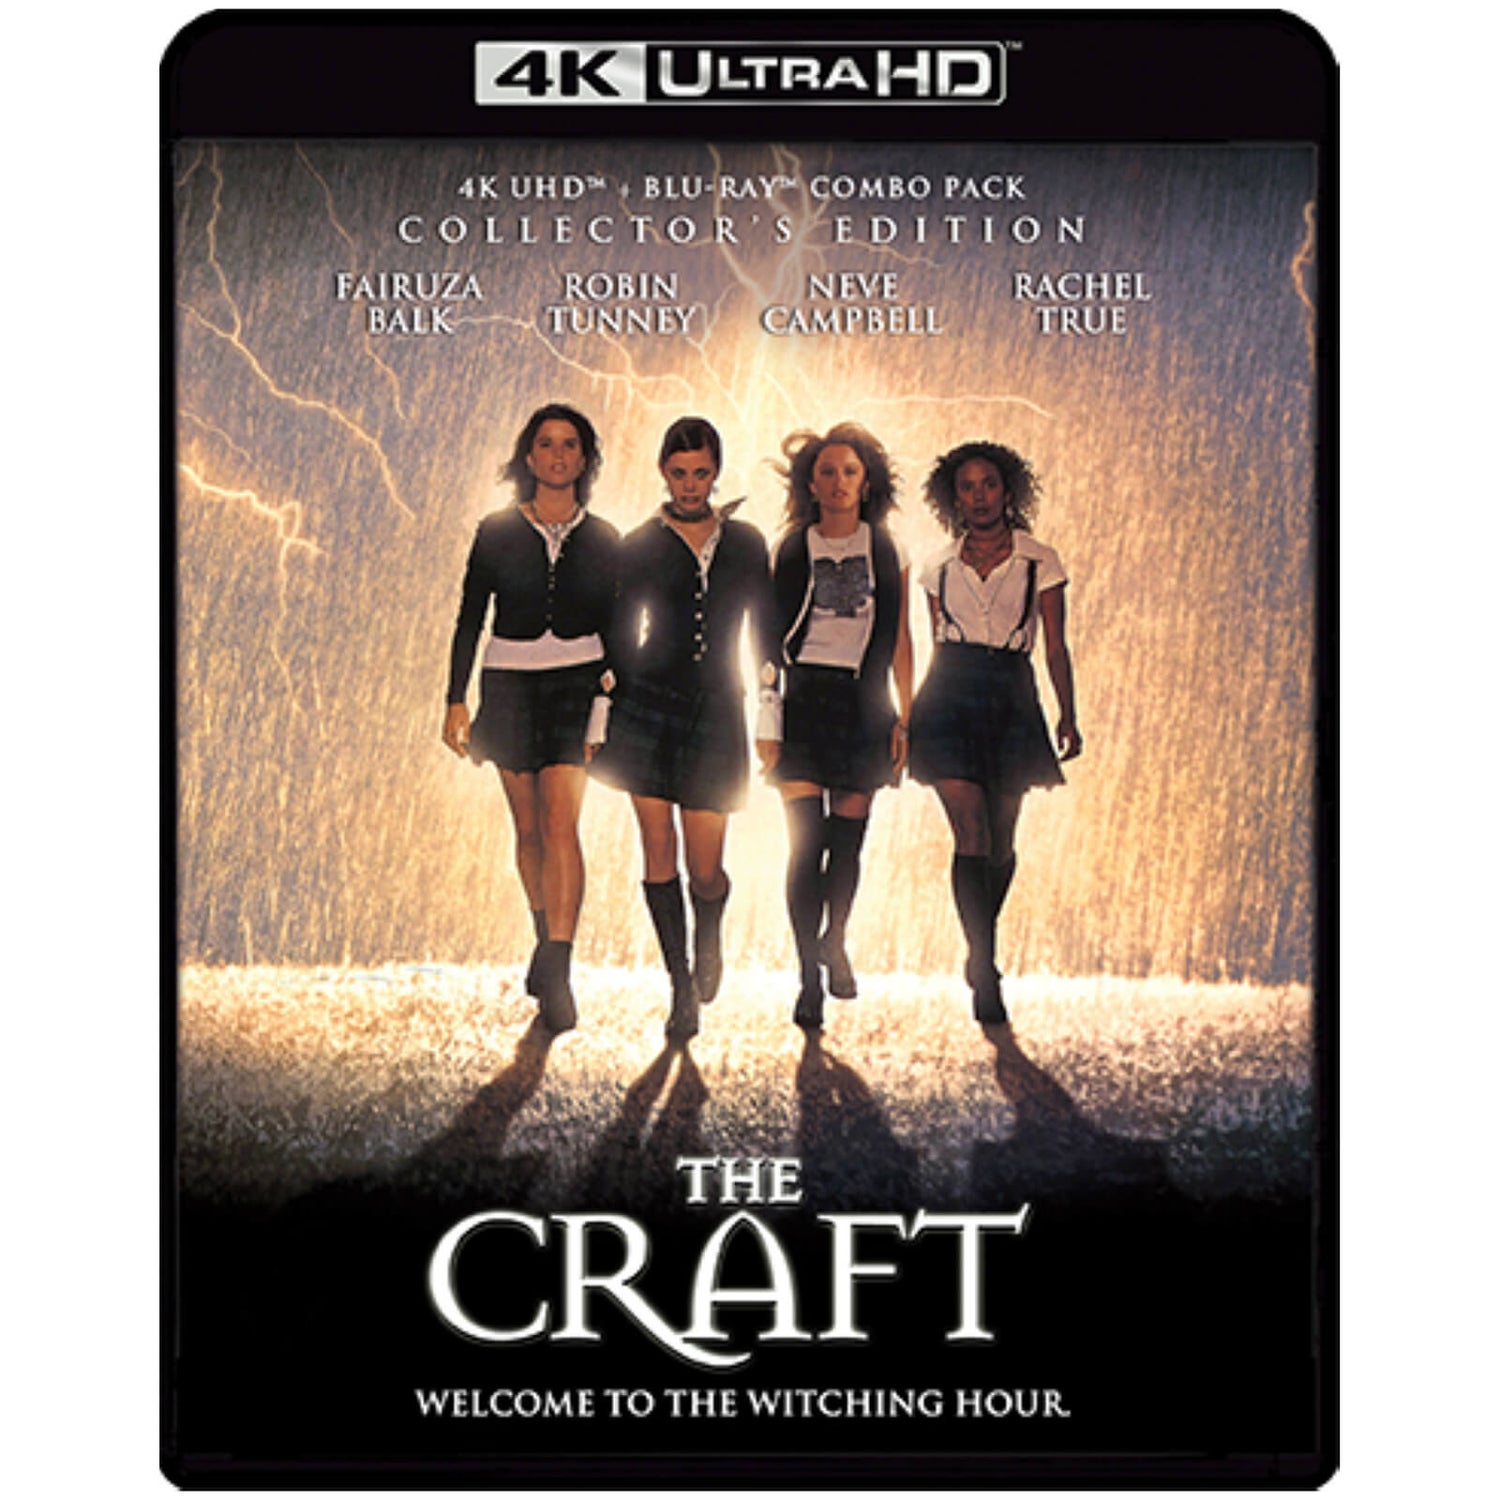 The Craft: Collector's Edition - 4K Ultra HD (Includes Blu-ray)